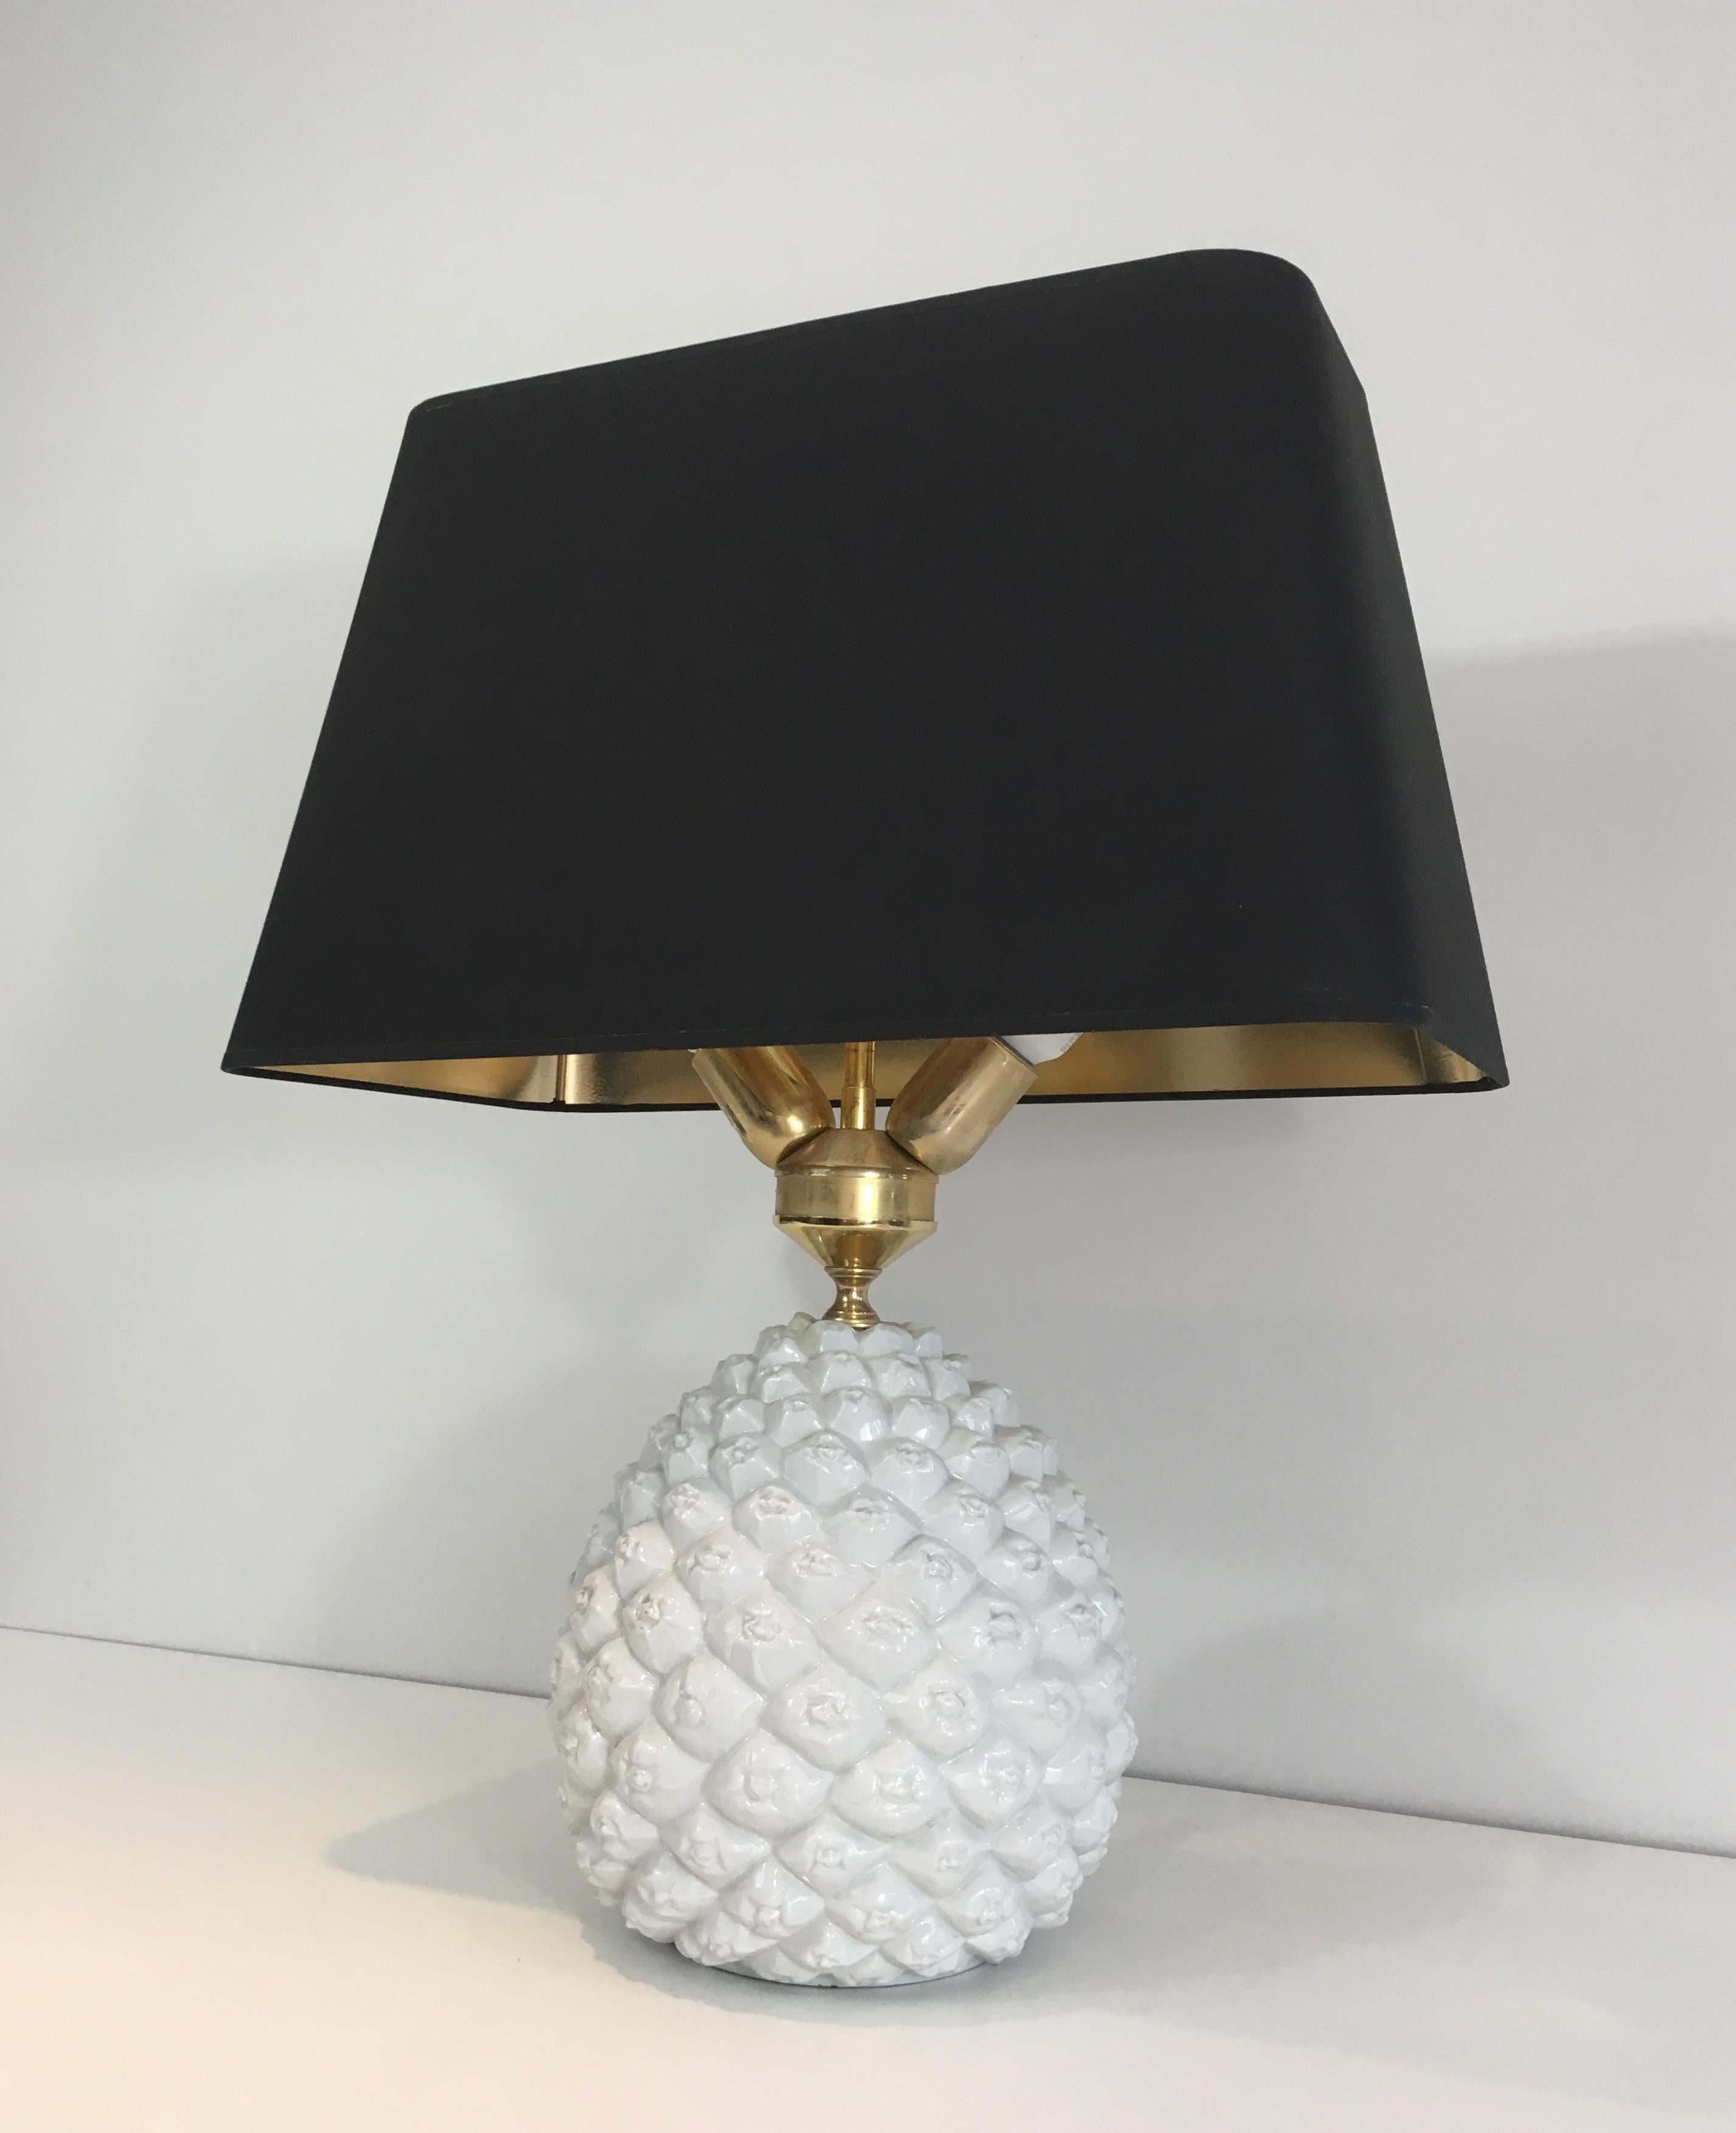 Design Pineapple Porcelain Table Lamp, Italy, circa 1970 For Sale 13